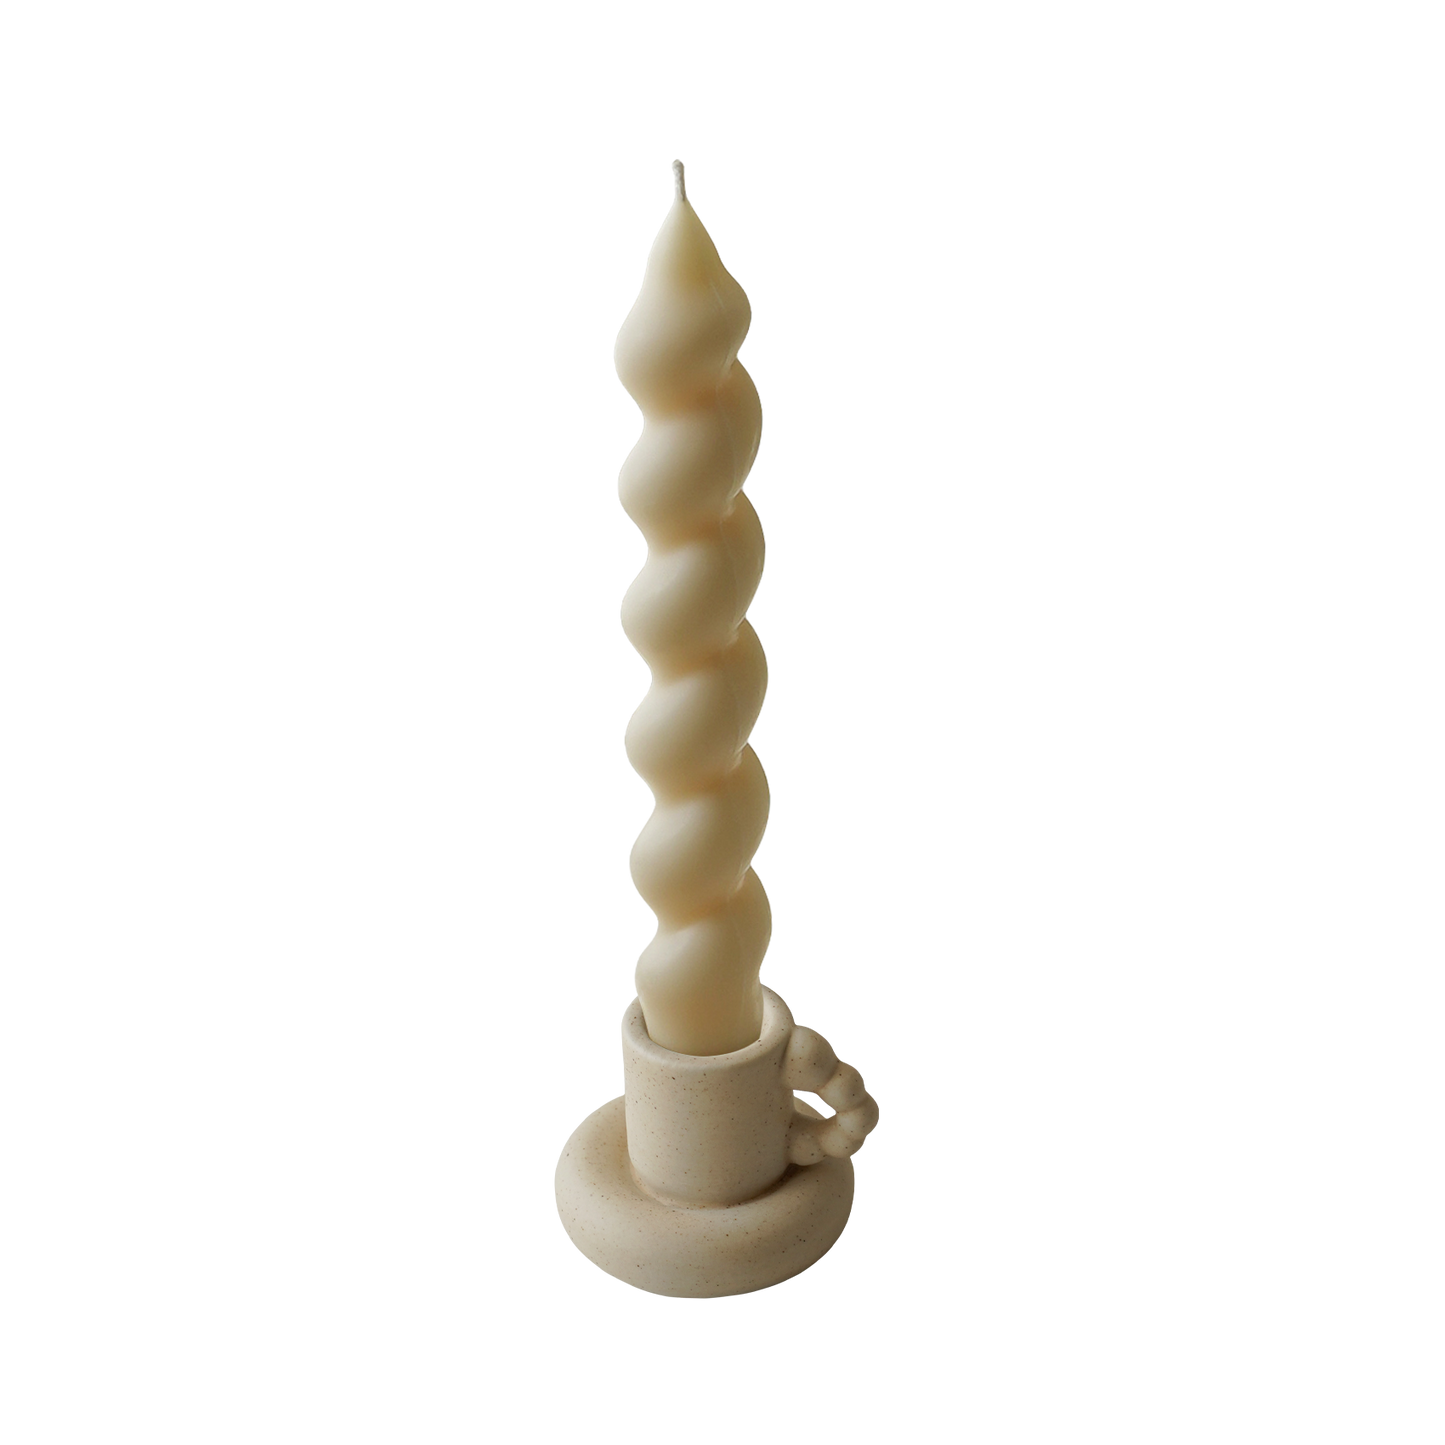 wavy spiral taper candle in a ceramic mug candle holder